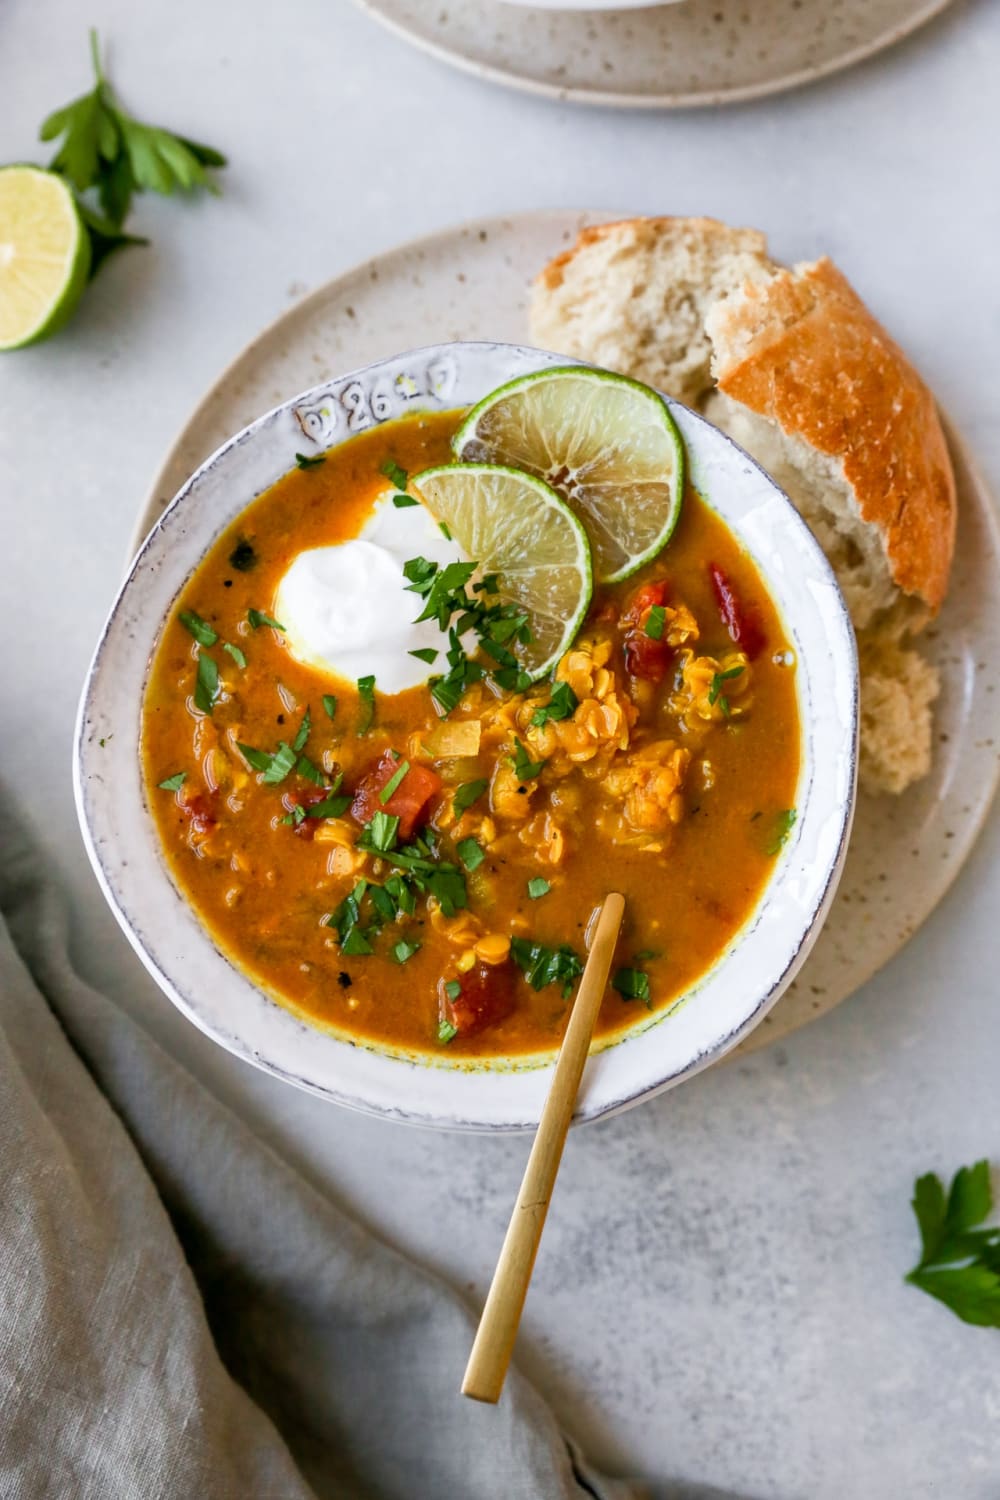 Major warm, cozy, and comforting vibes with a tasty red lentil soup!